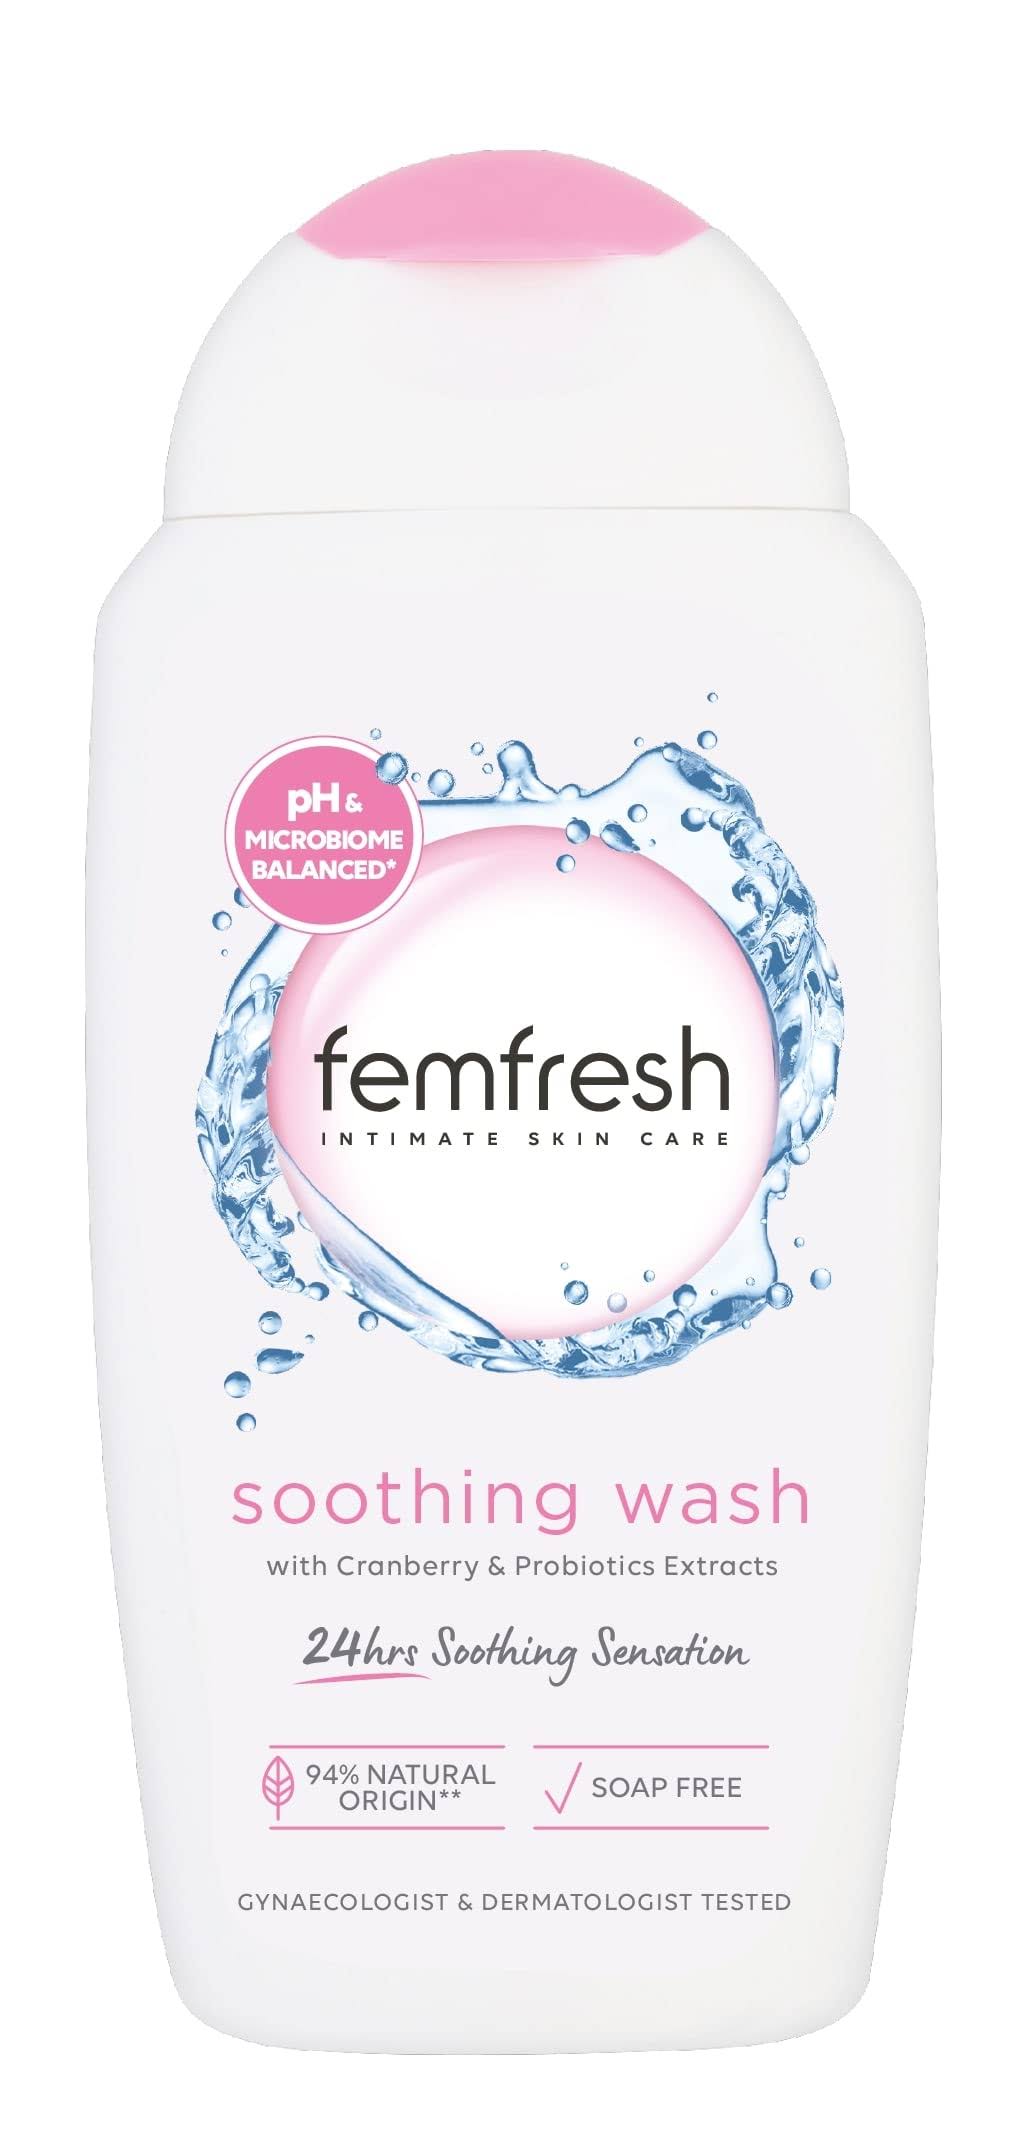 Femfresh Ultimate Care Soothing Wash 250ml